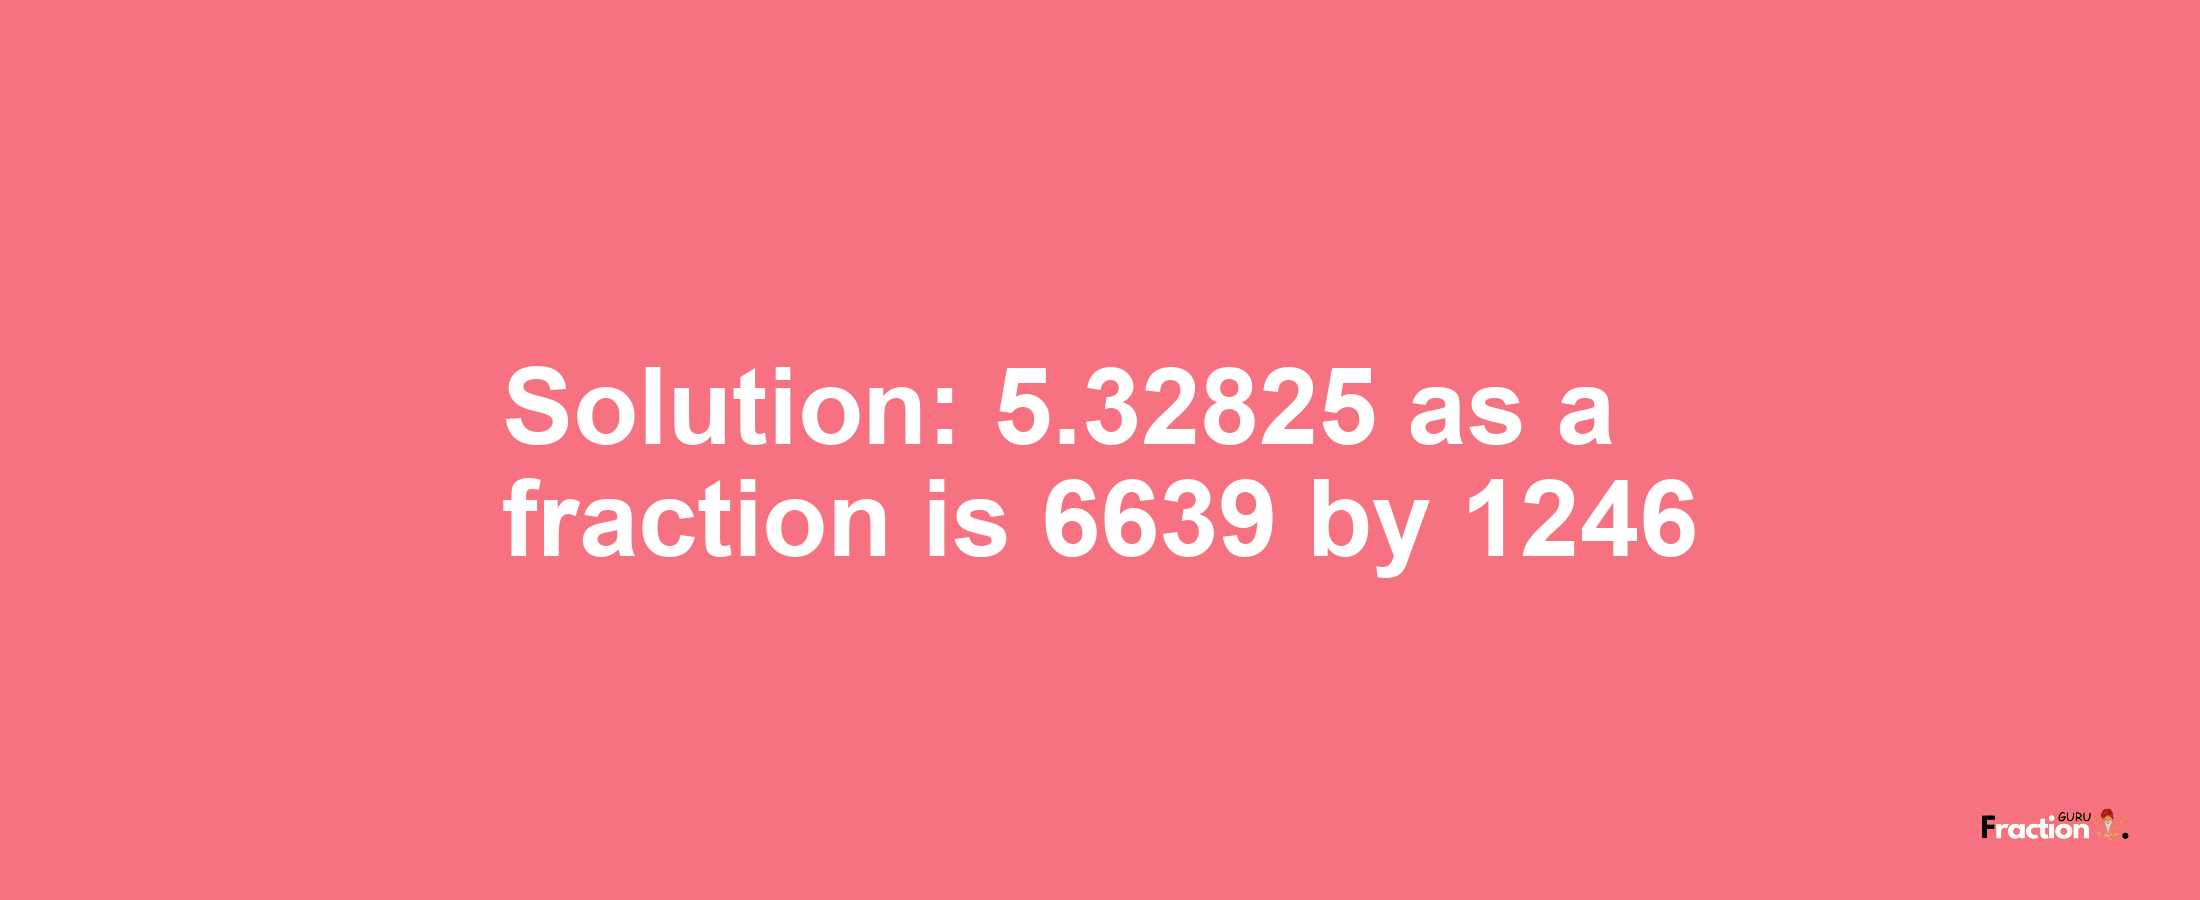 Solution:5.32825 as a fraction is 6639/1246